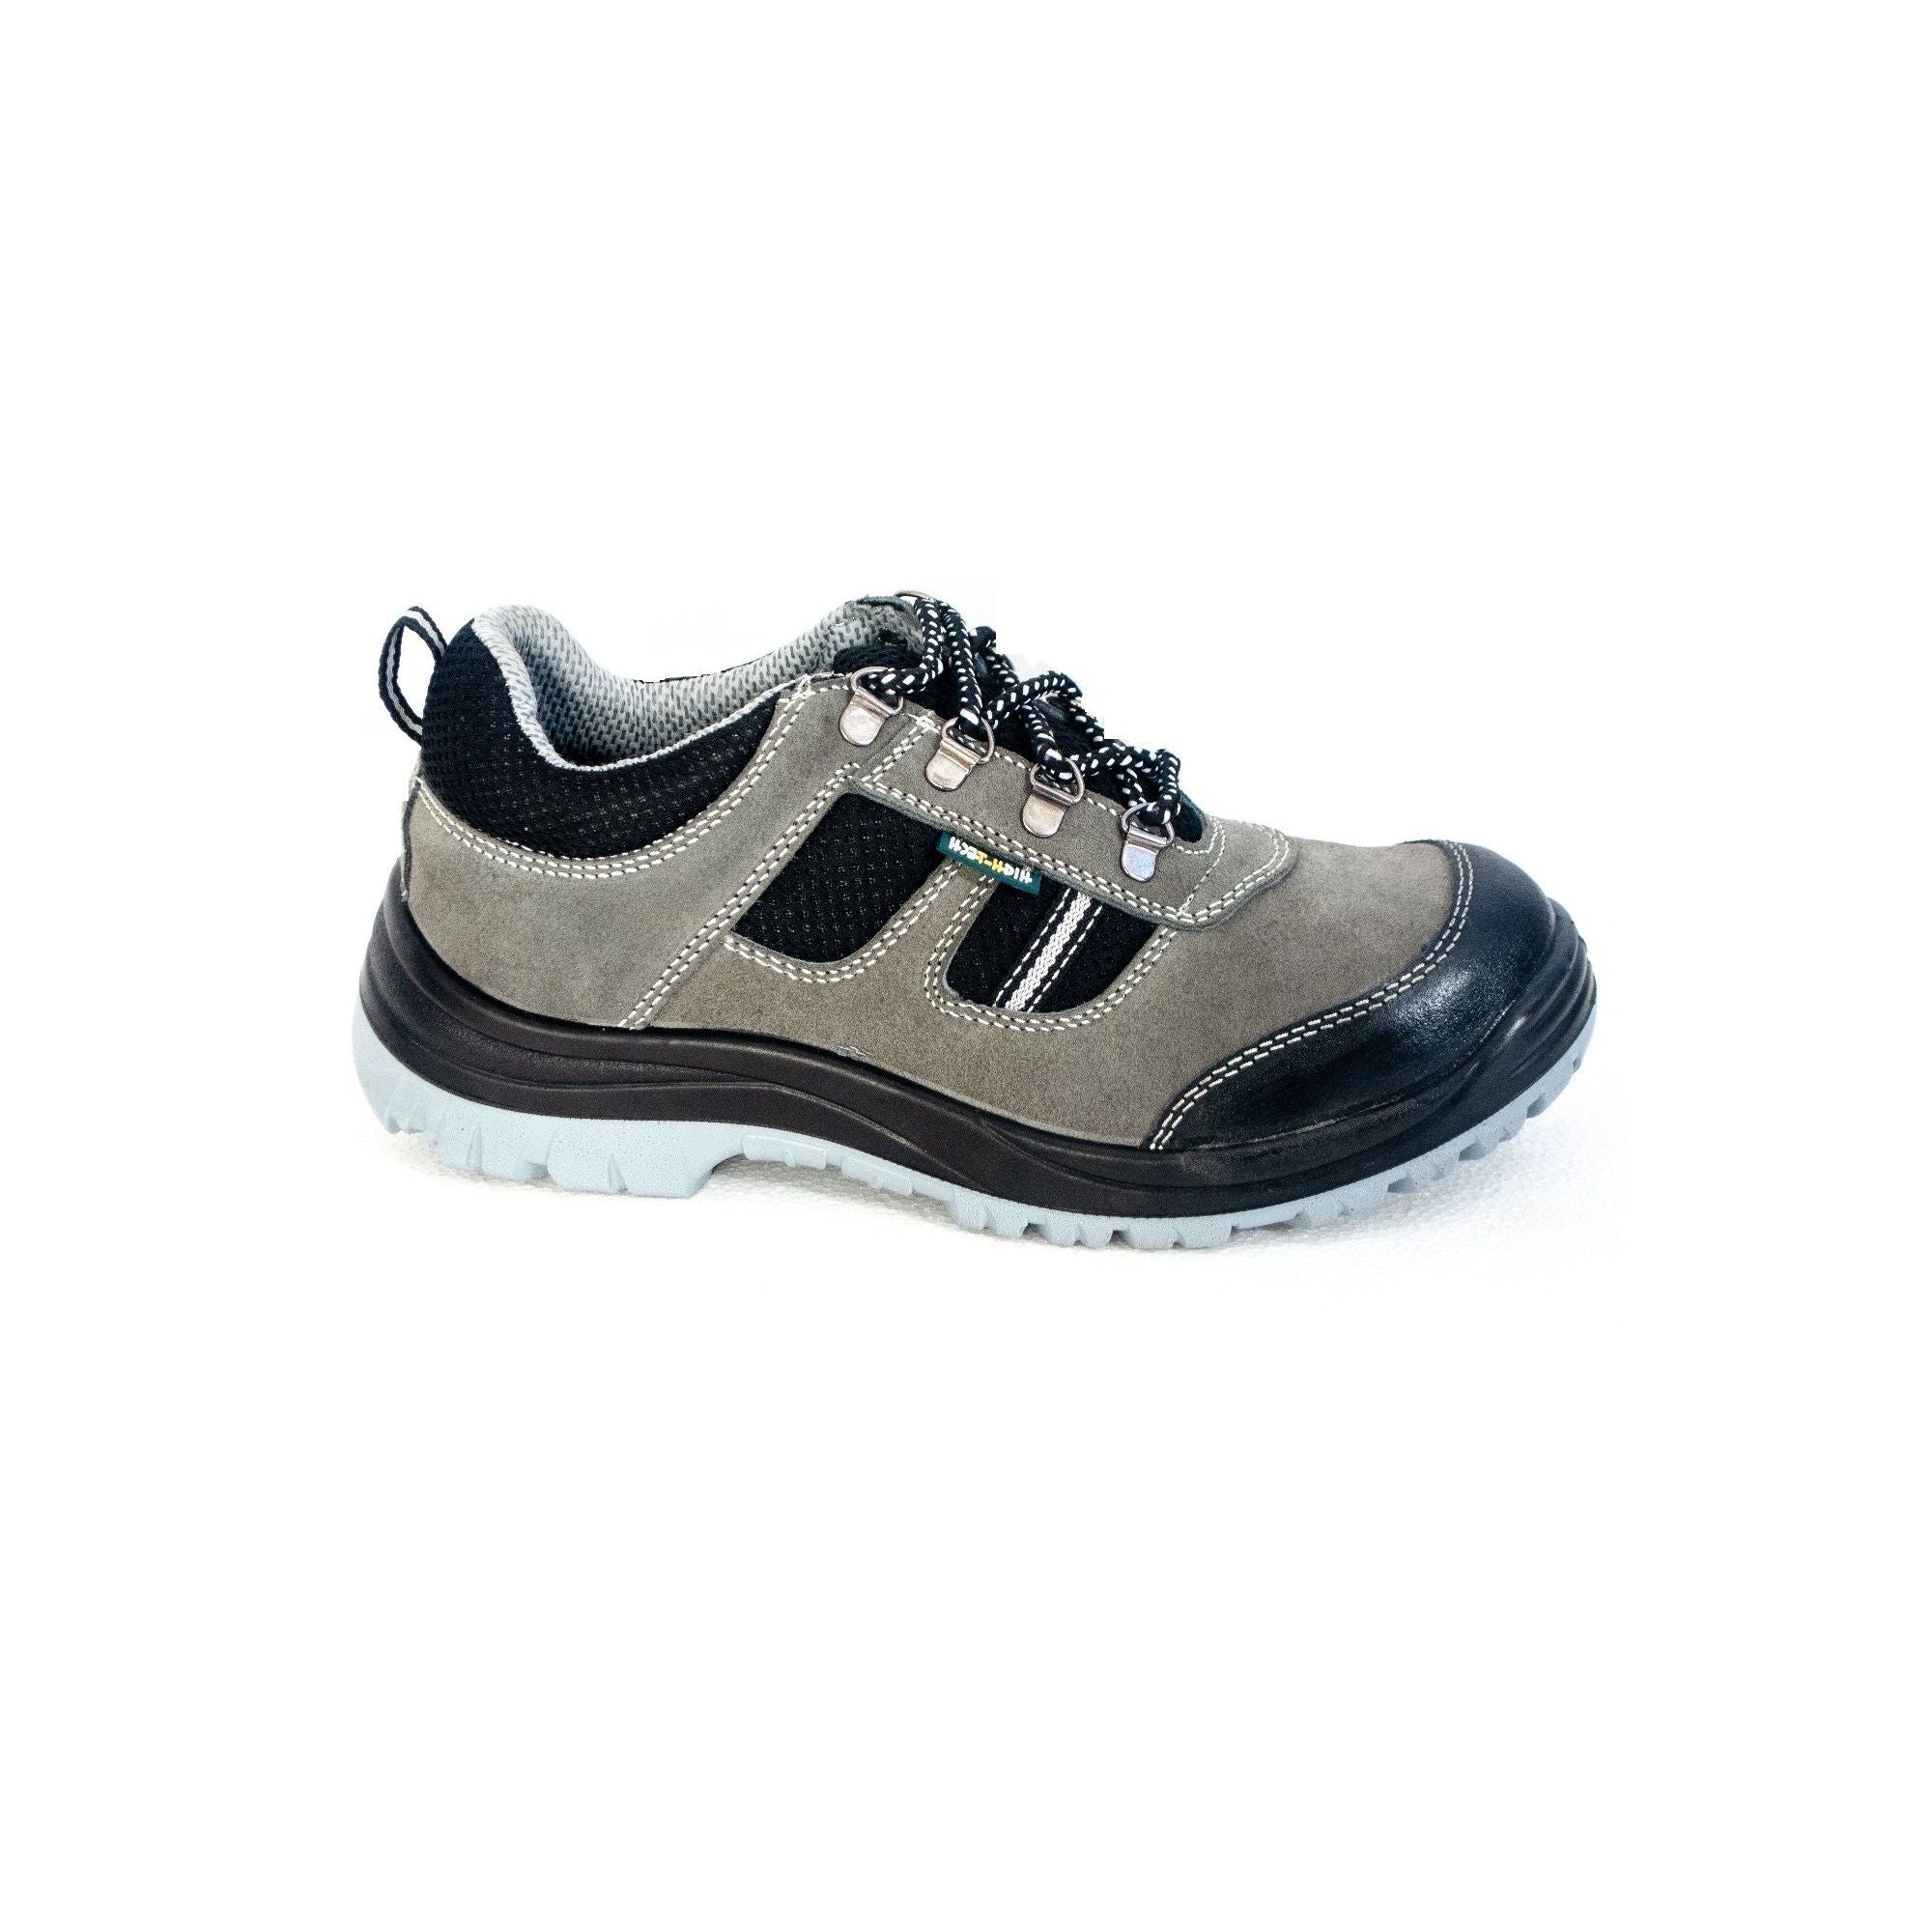 High Tech Dual Density Soft Spacer Steel Toe Safety Shoe HT-856